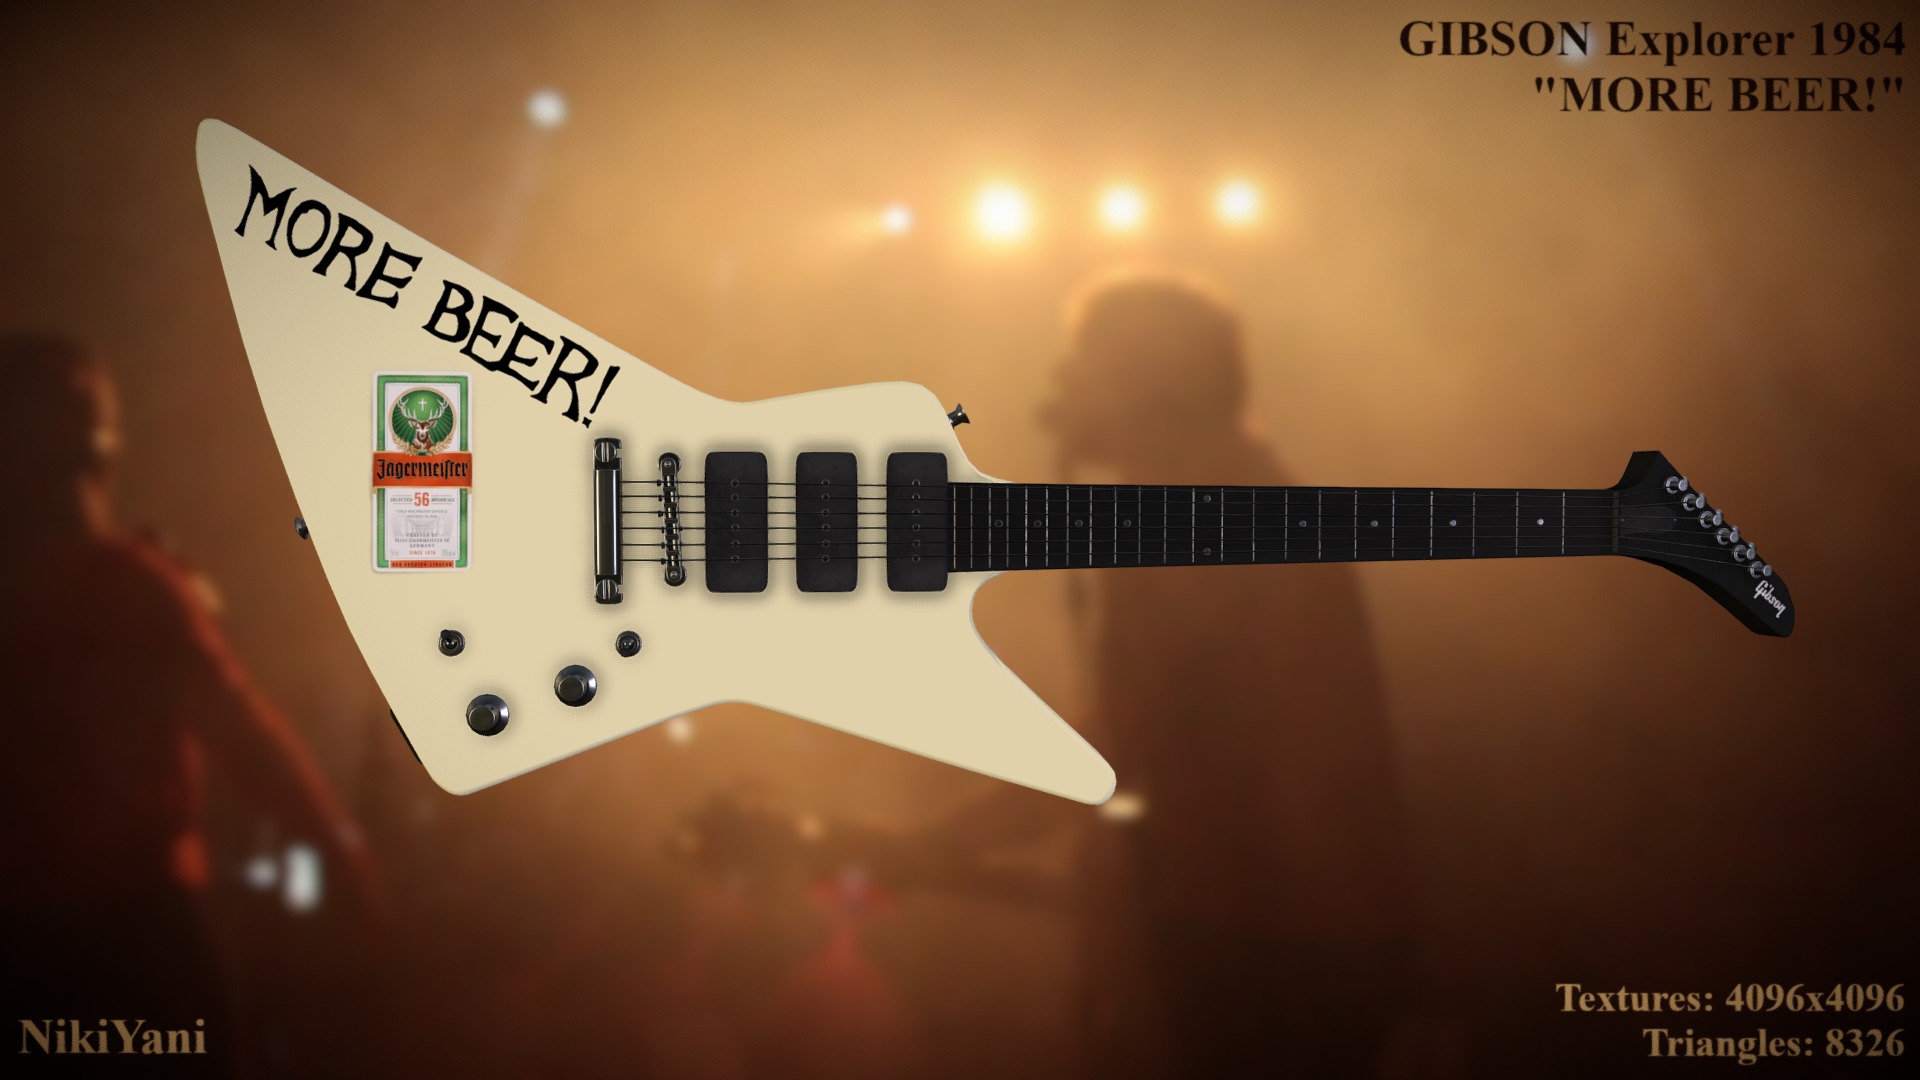 3D model 1984 Gibson Explorer "MORE BEER!" - This is a 3D model of the 1984 Gibson Explorer "MORE BEER!". The 3D model is about a guitar on a stand.